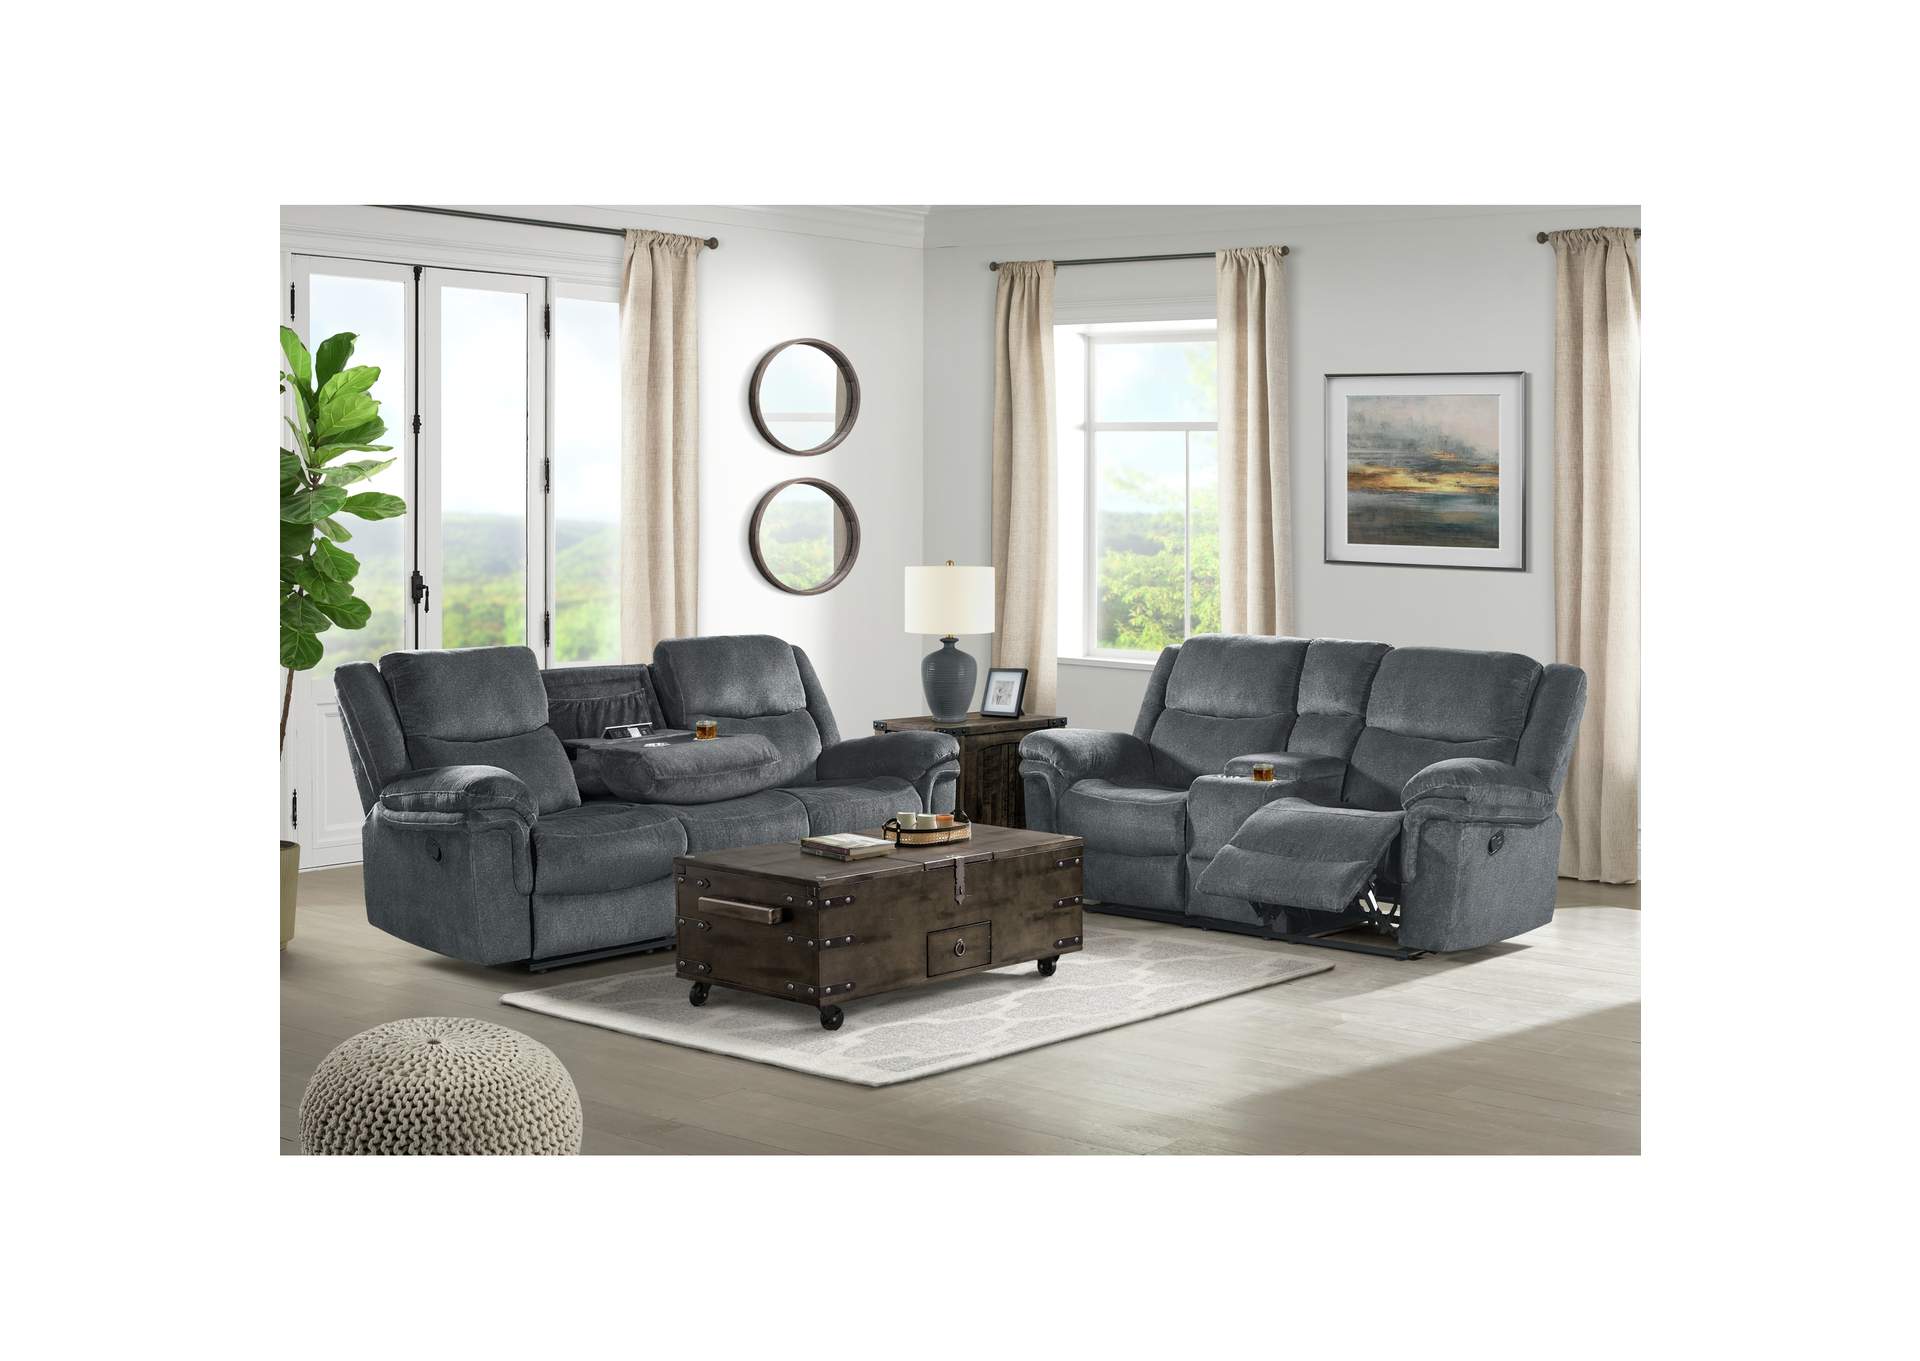 Lawrence Motion Sofa With Dropdown In Slate,Elements